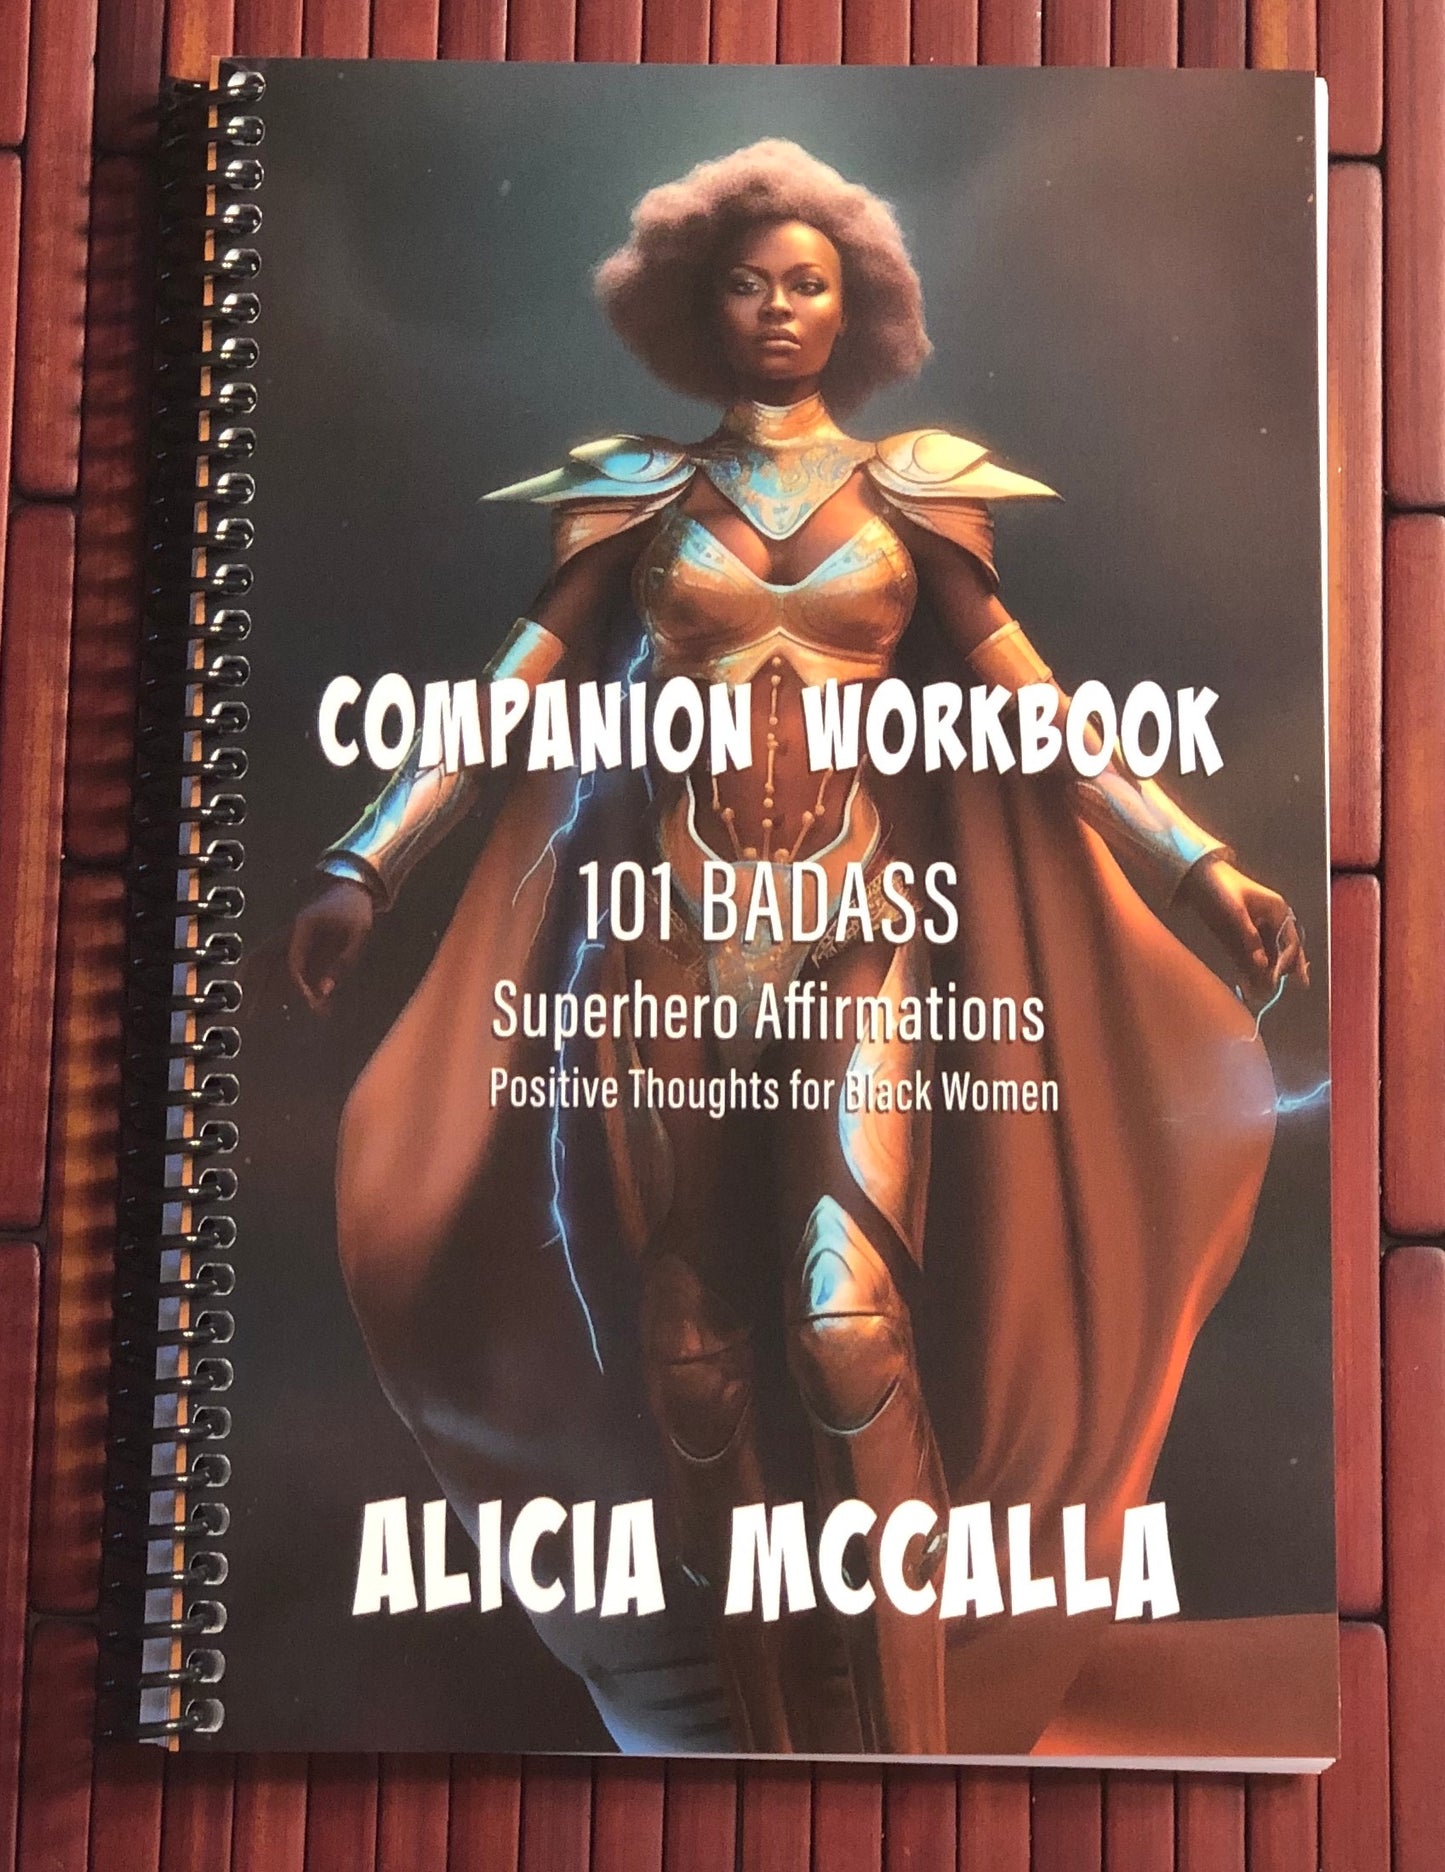 Front Cover showing Spiral of Companion Workbook to 101 Badass Superhero Affirmations